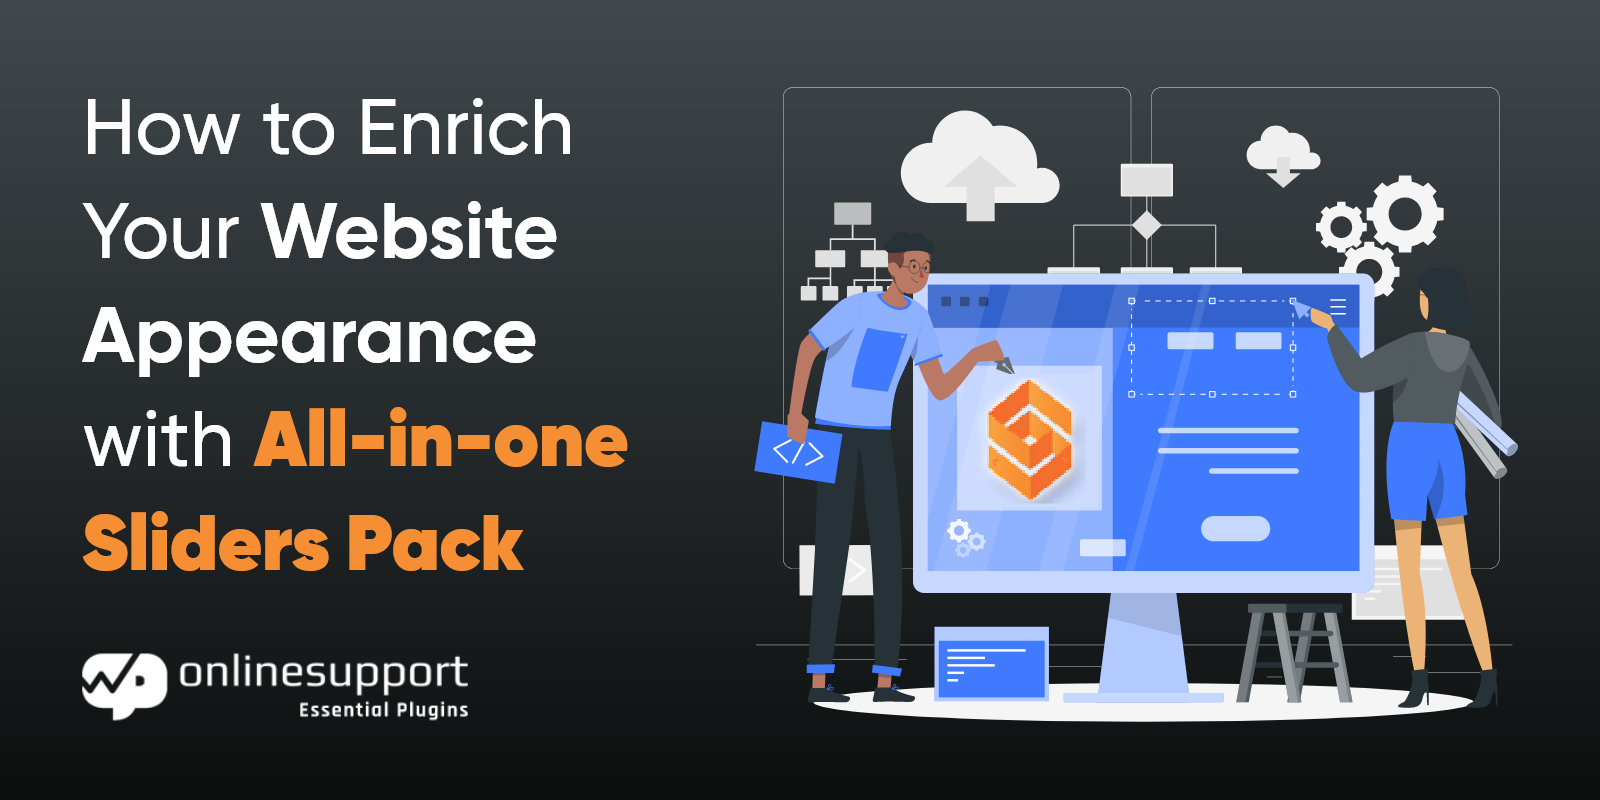 How to Enrich Your Website Appearance with All-in-One SlidersPack?